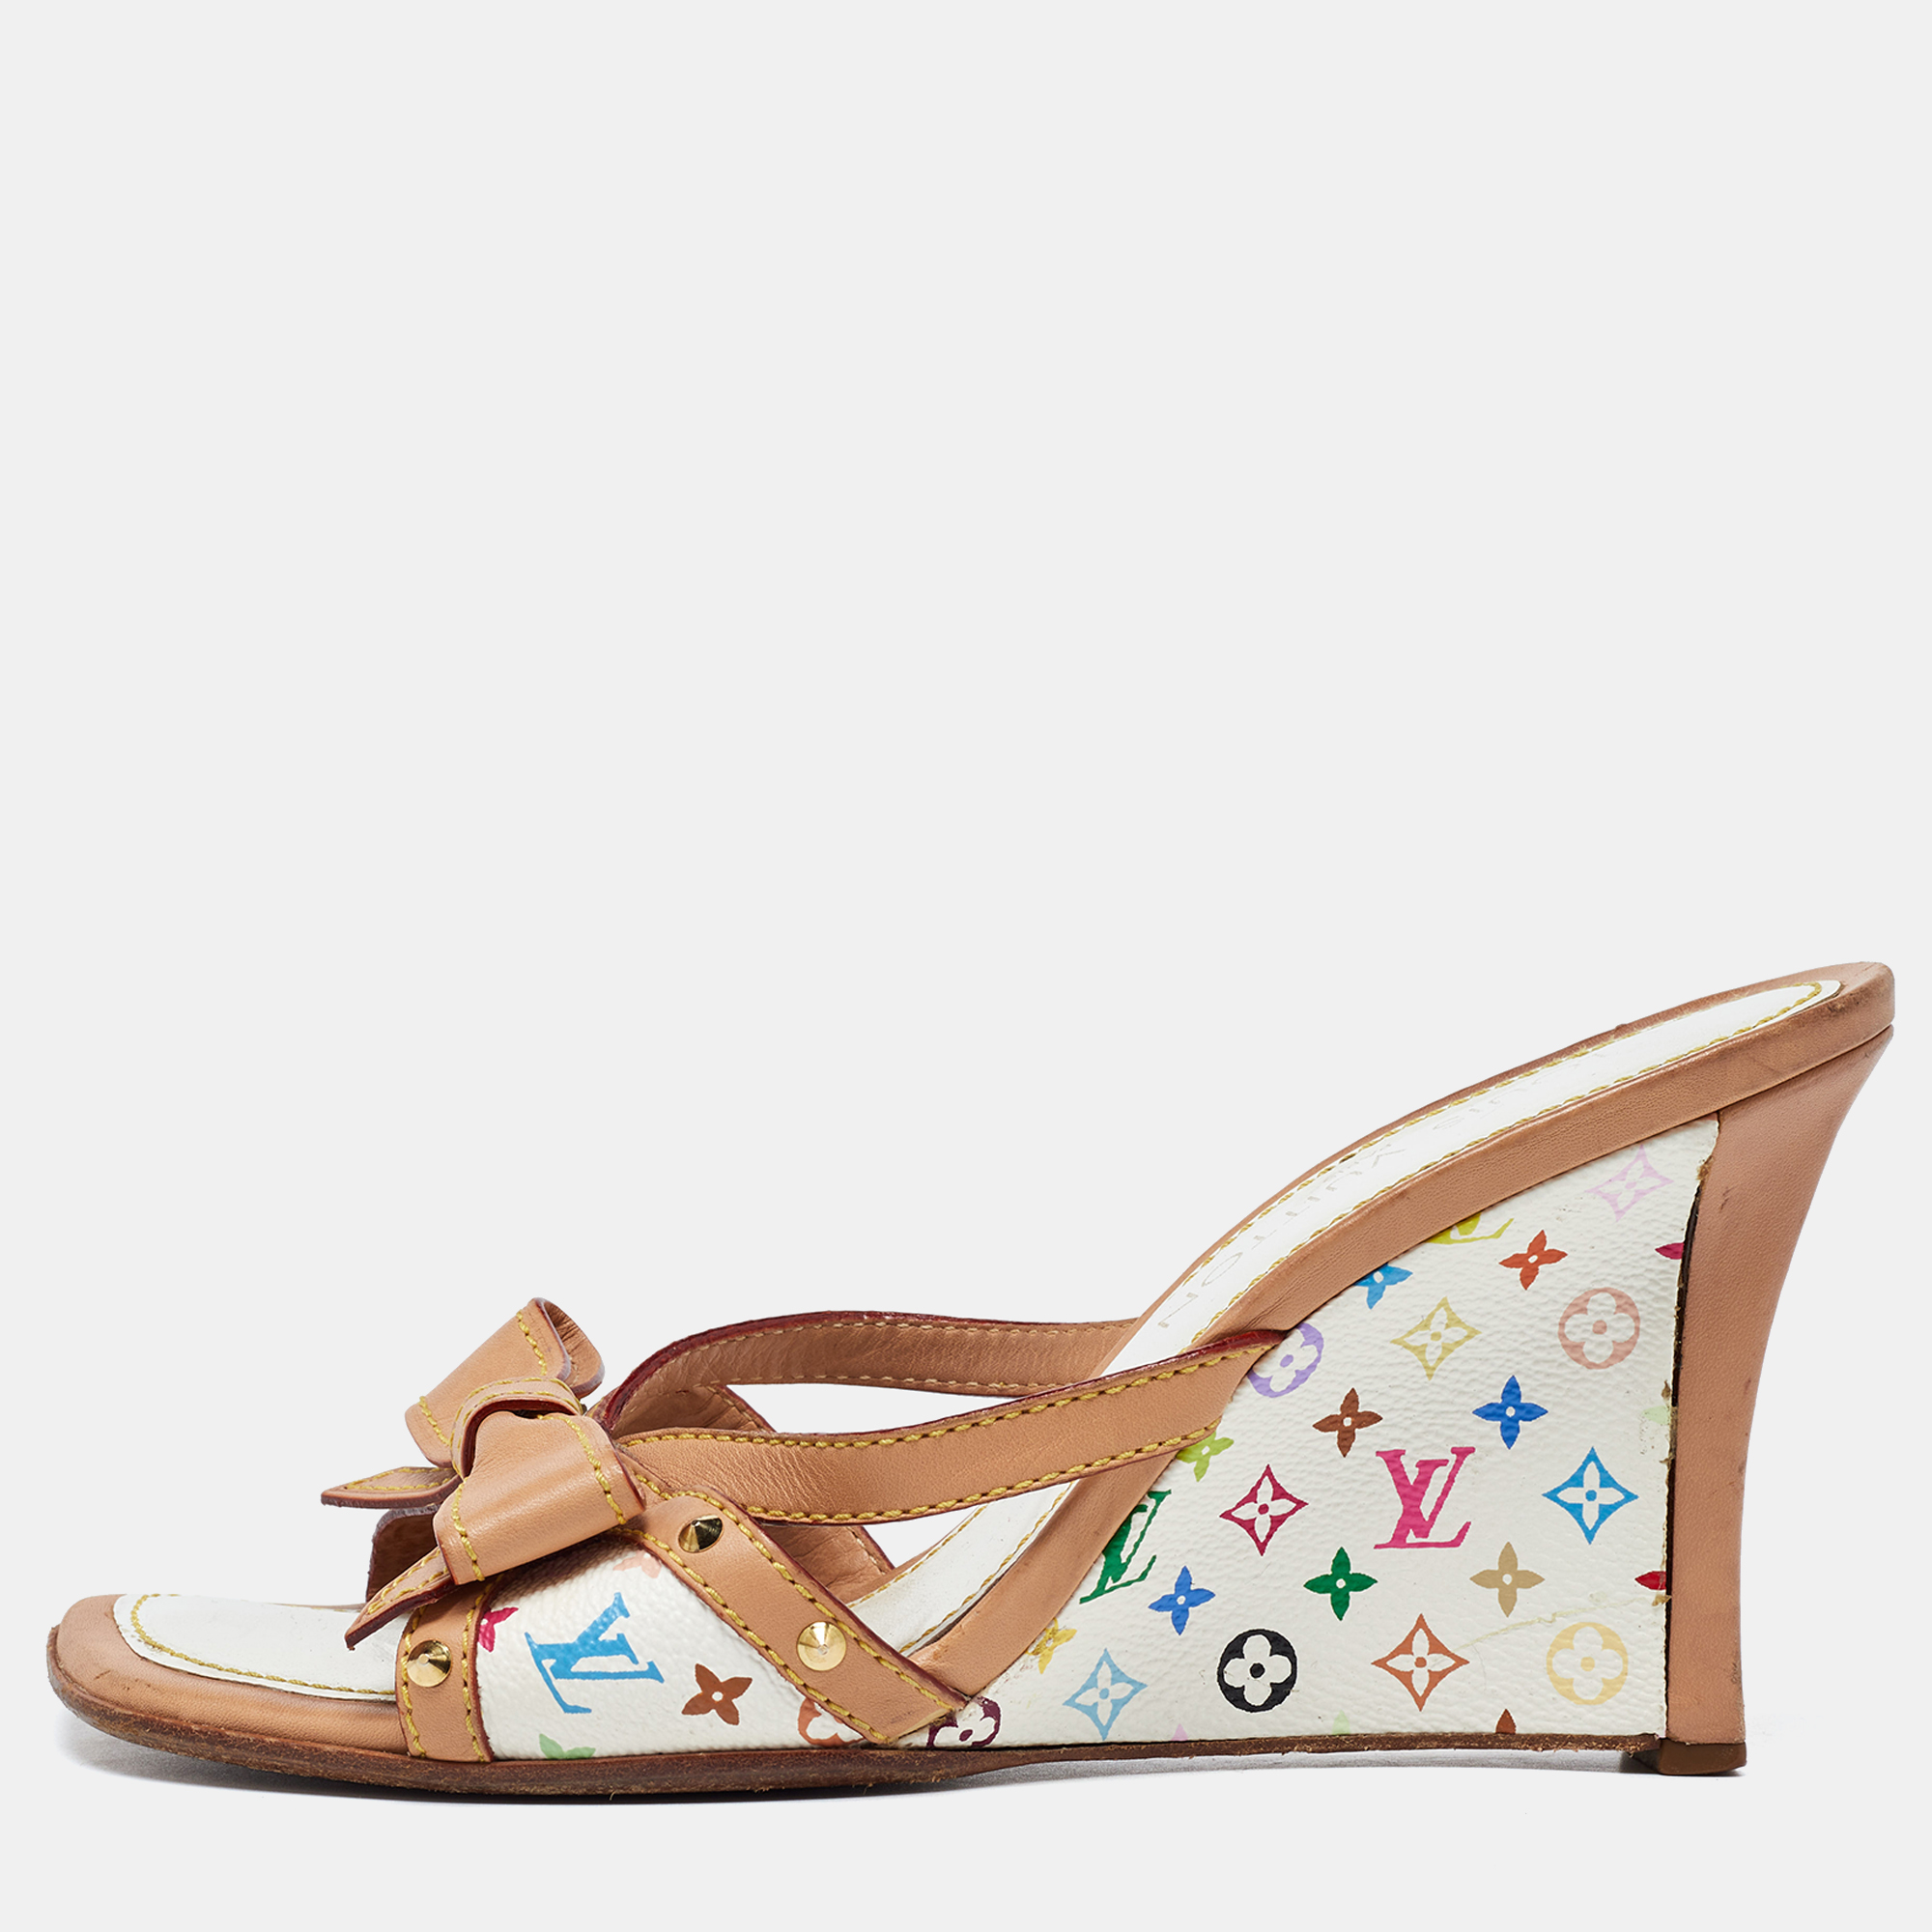 

Louis Vuitton White/Tan Monogram Canvas and Leather Bow Wedge Slide Sandals Size